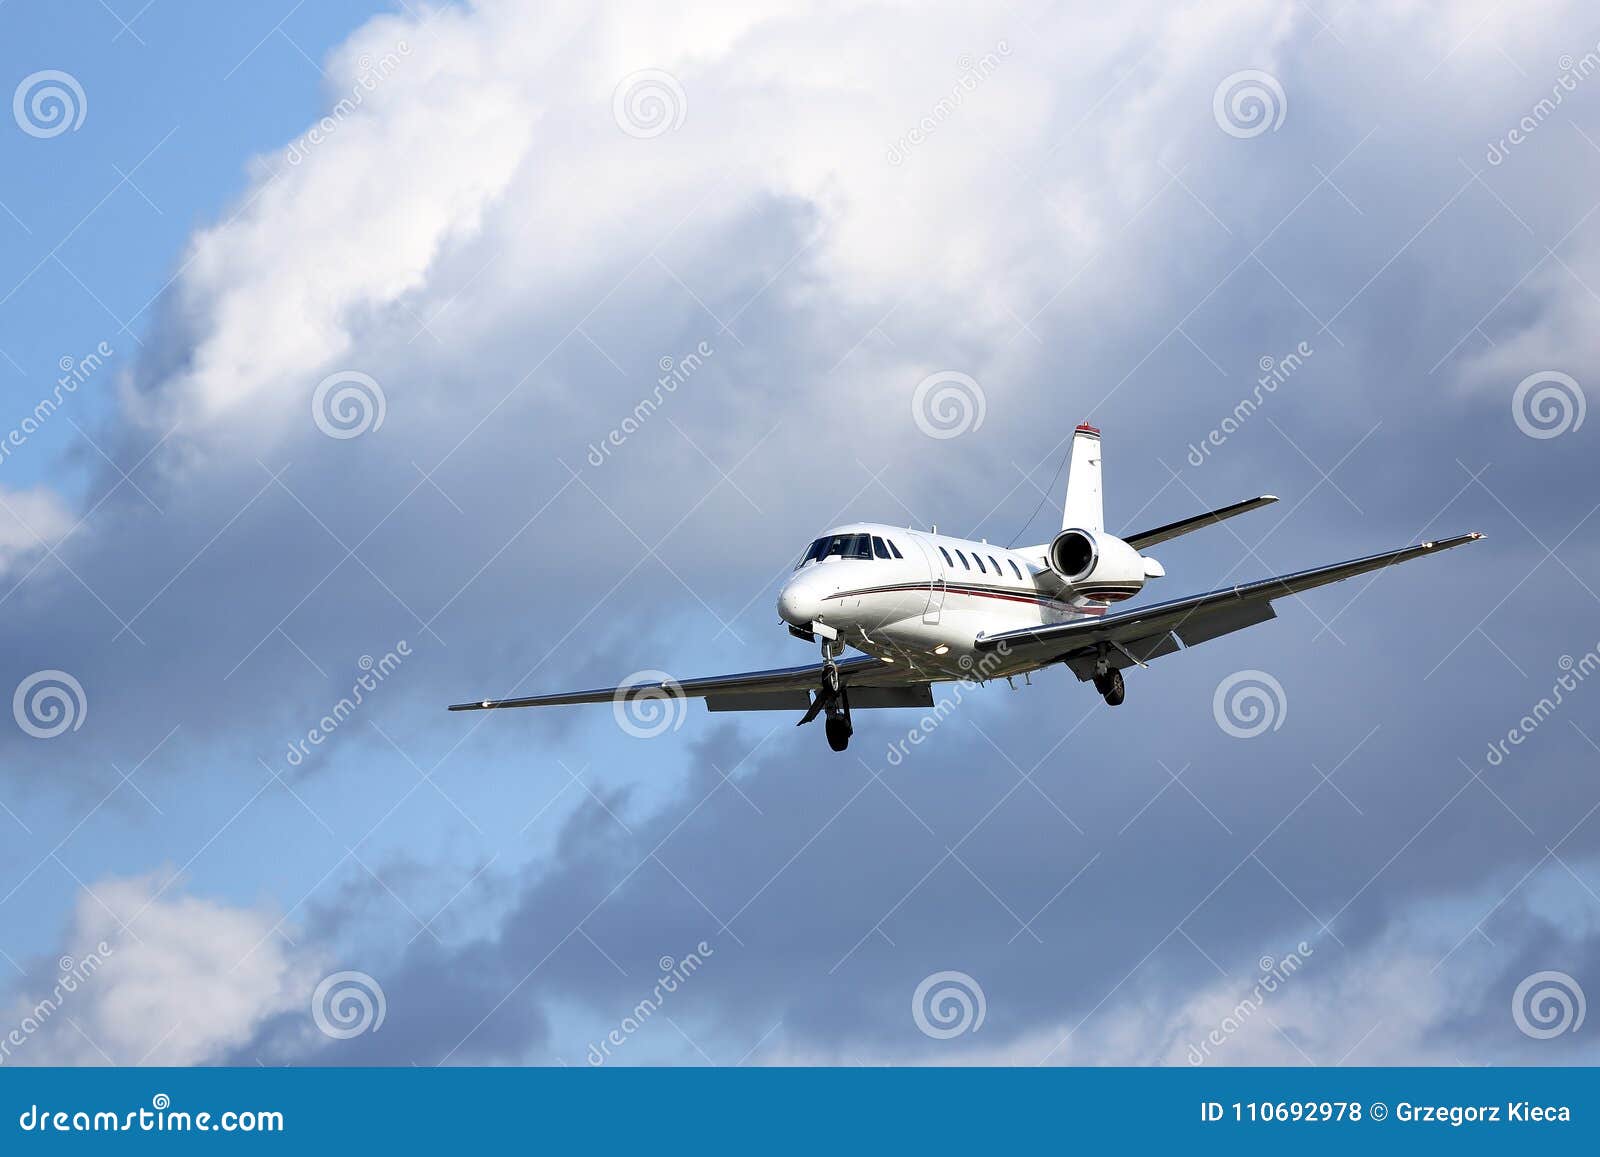 private jet on approach to land